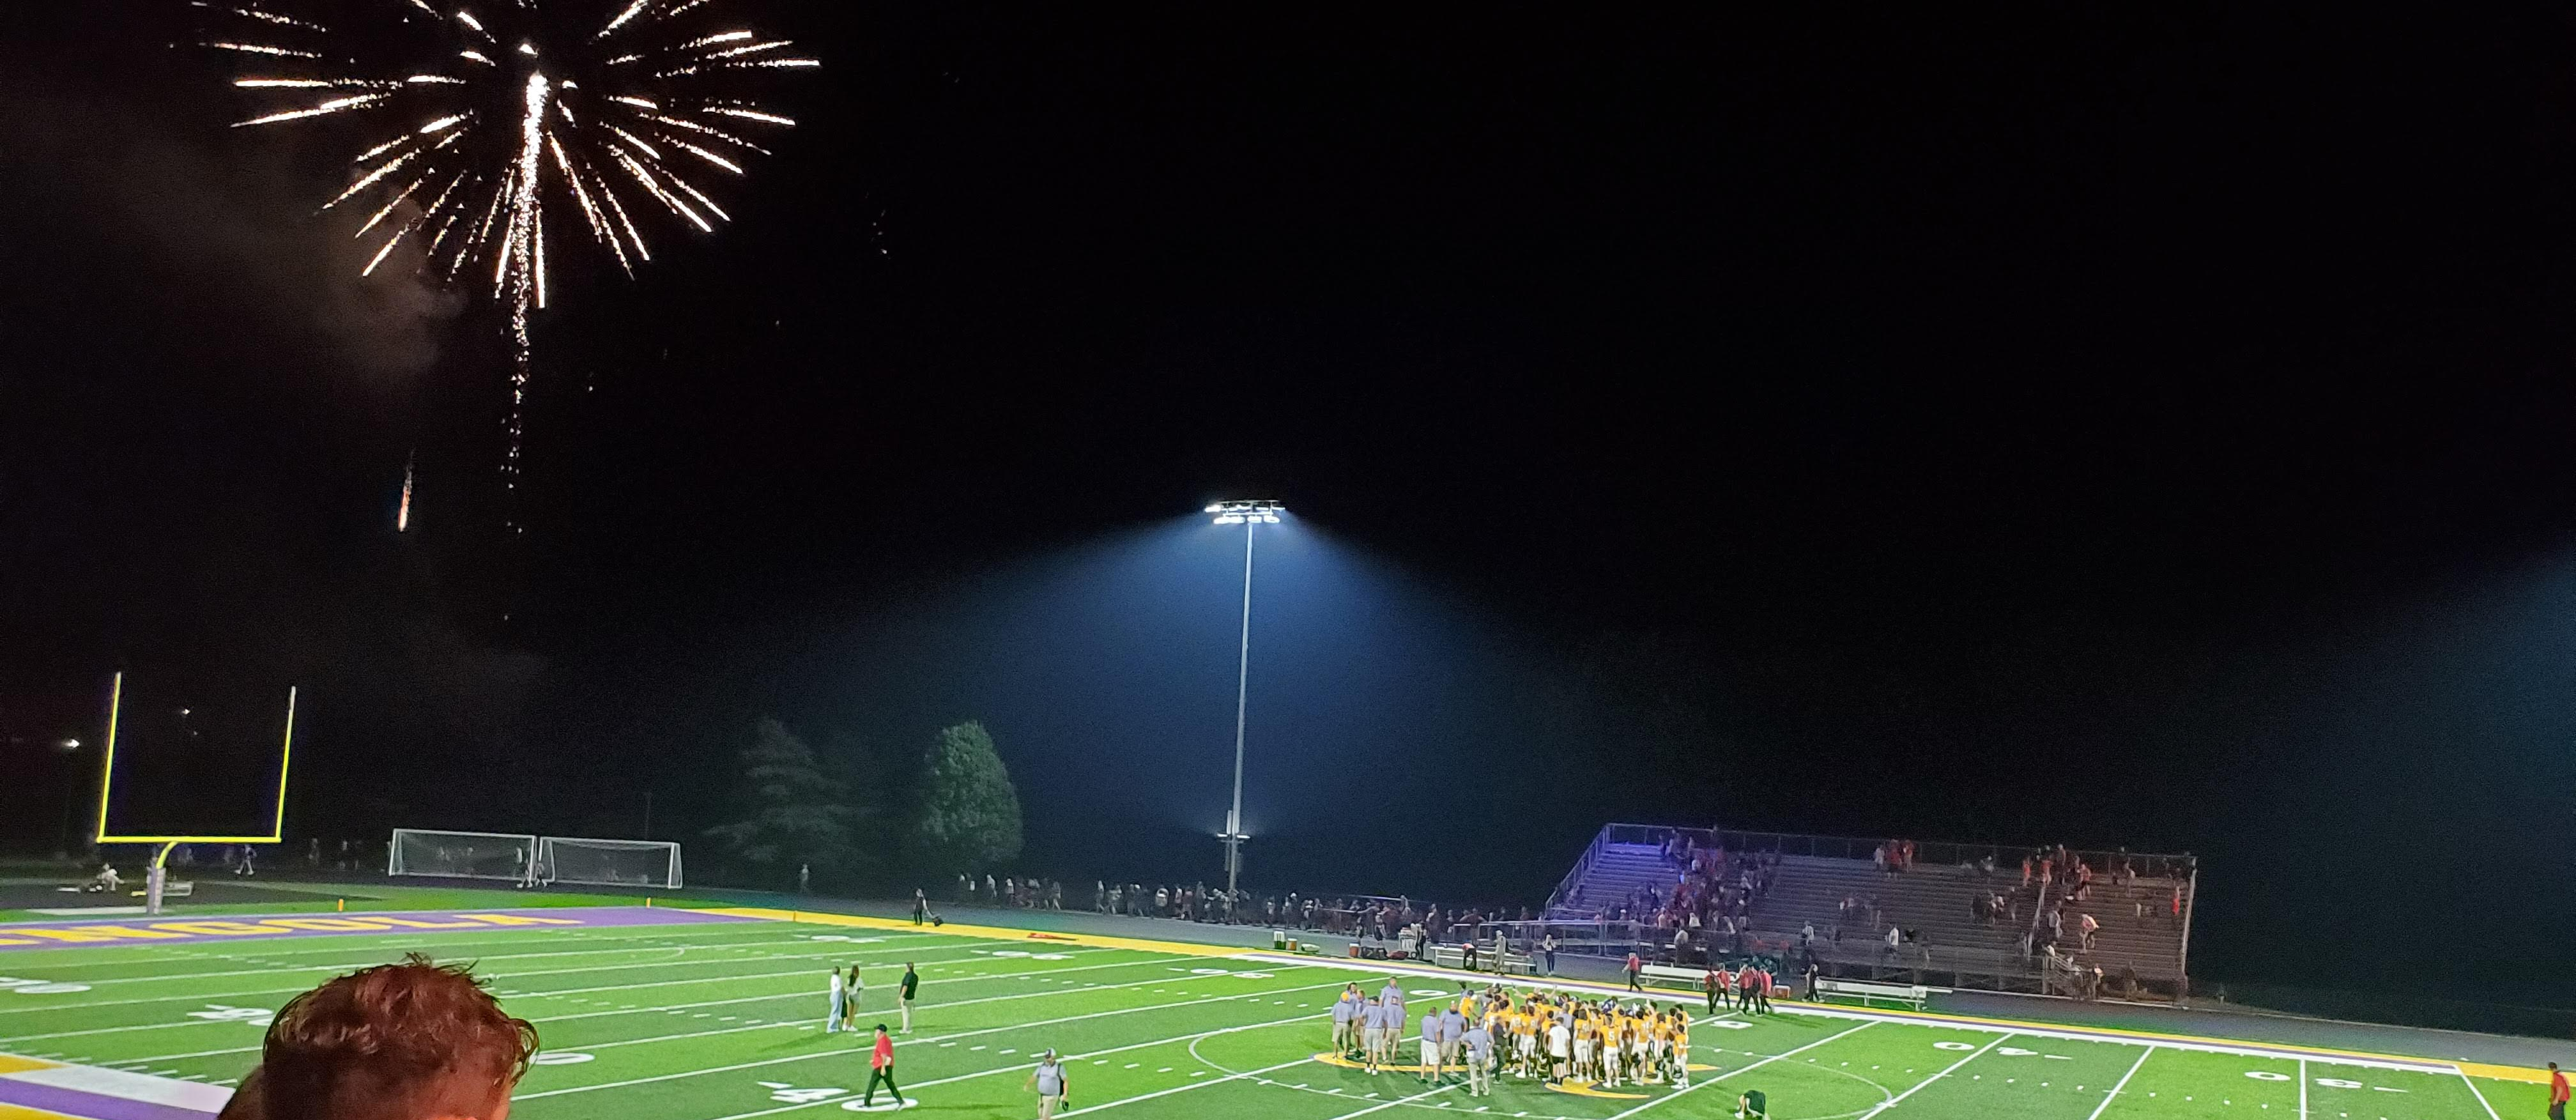 Lights on the football field, the team celebrating, and fireworks in the sky